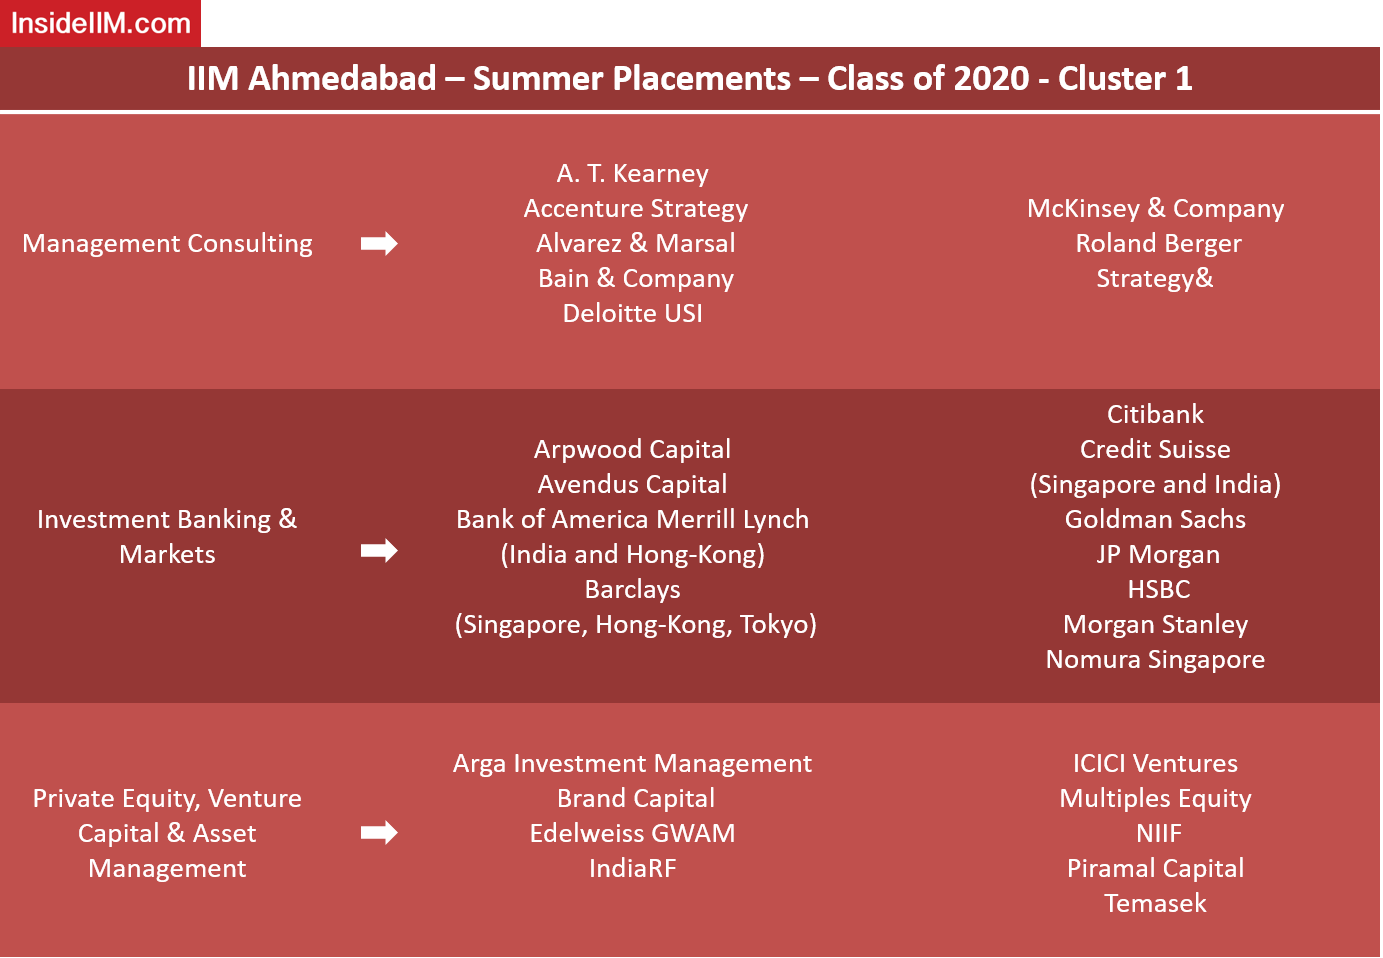 IIM Ahmedabad Placements - Companies: Management Consulting, Investment Banking & Markets, Private Equity, Venture Capital & Asset Management